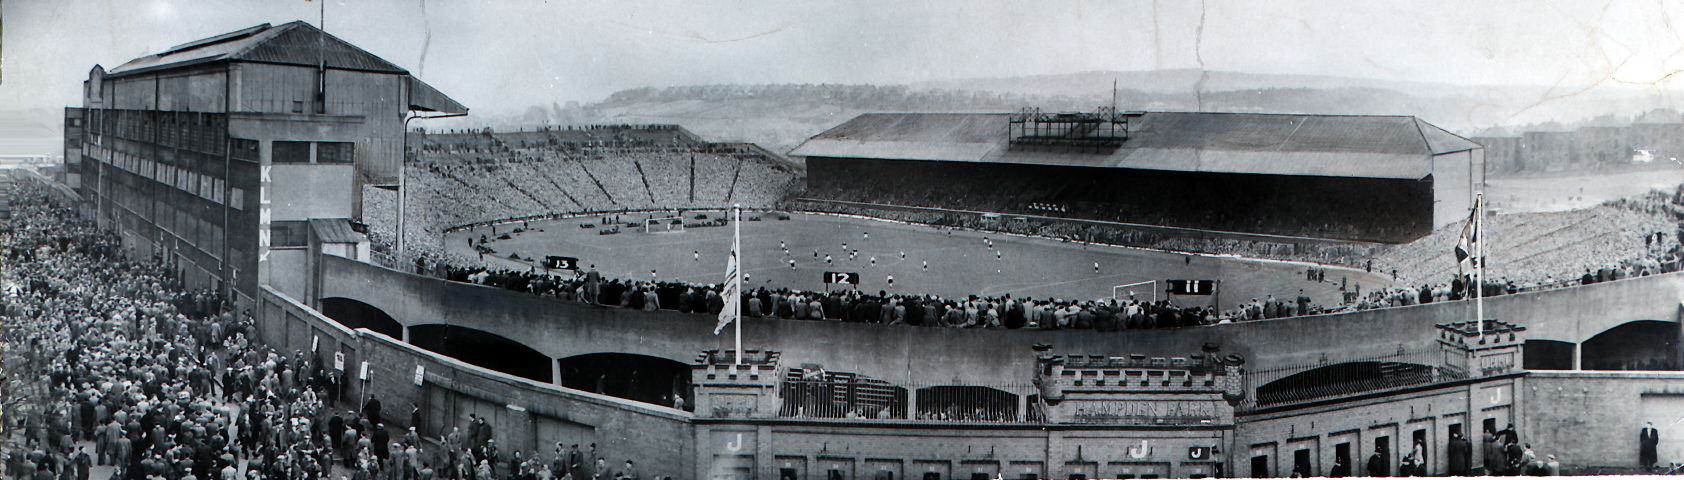 Hampden Park has a rich and exciting 114 year history